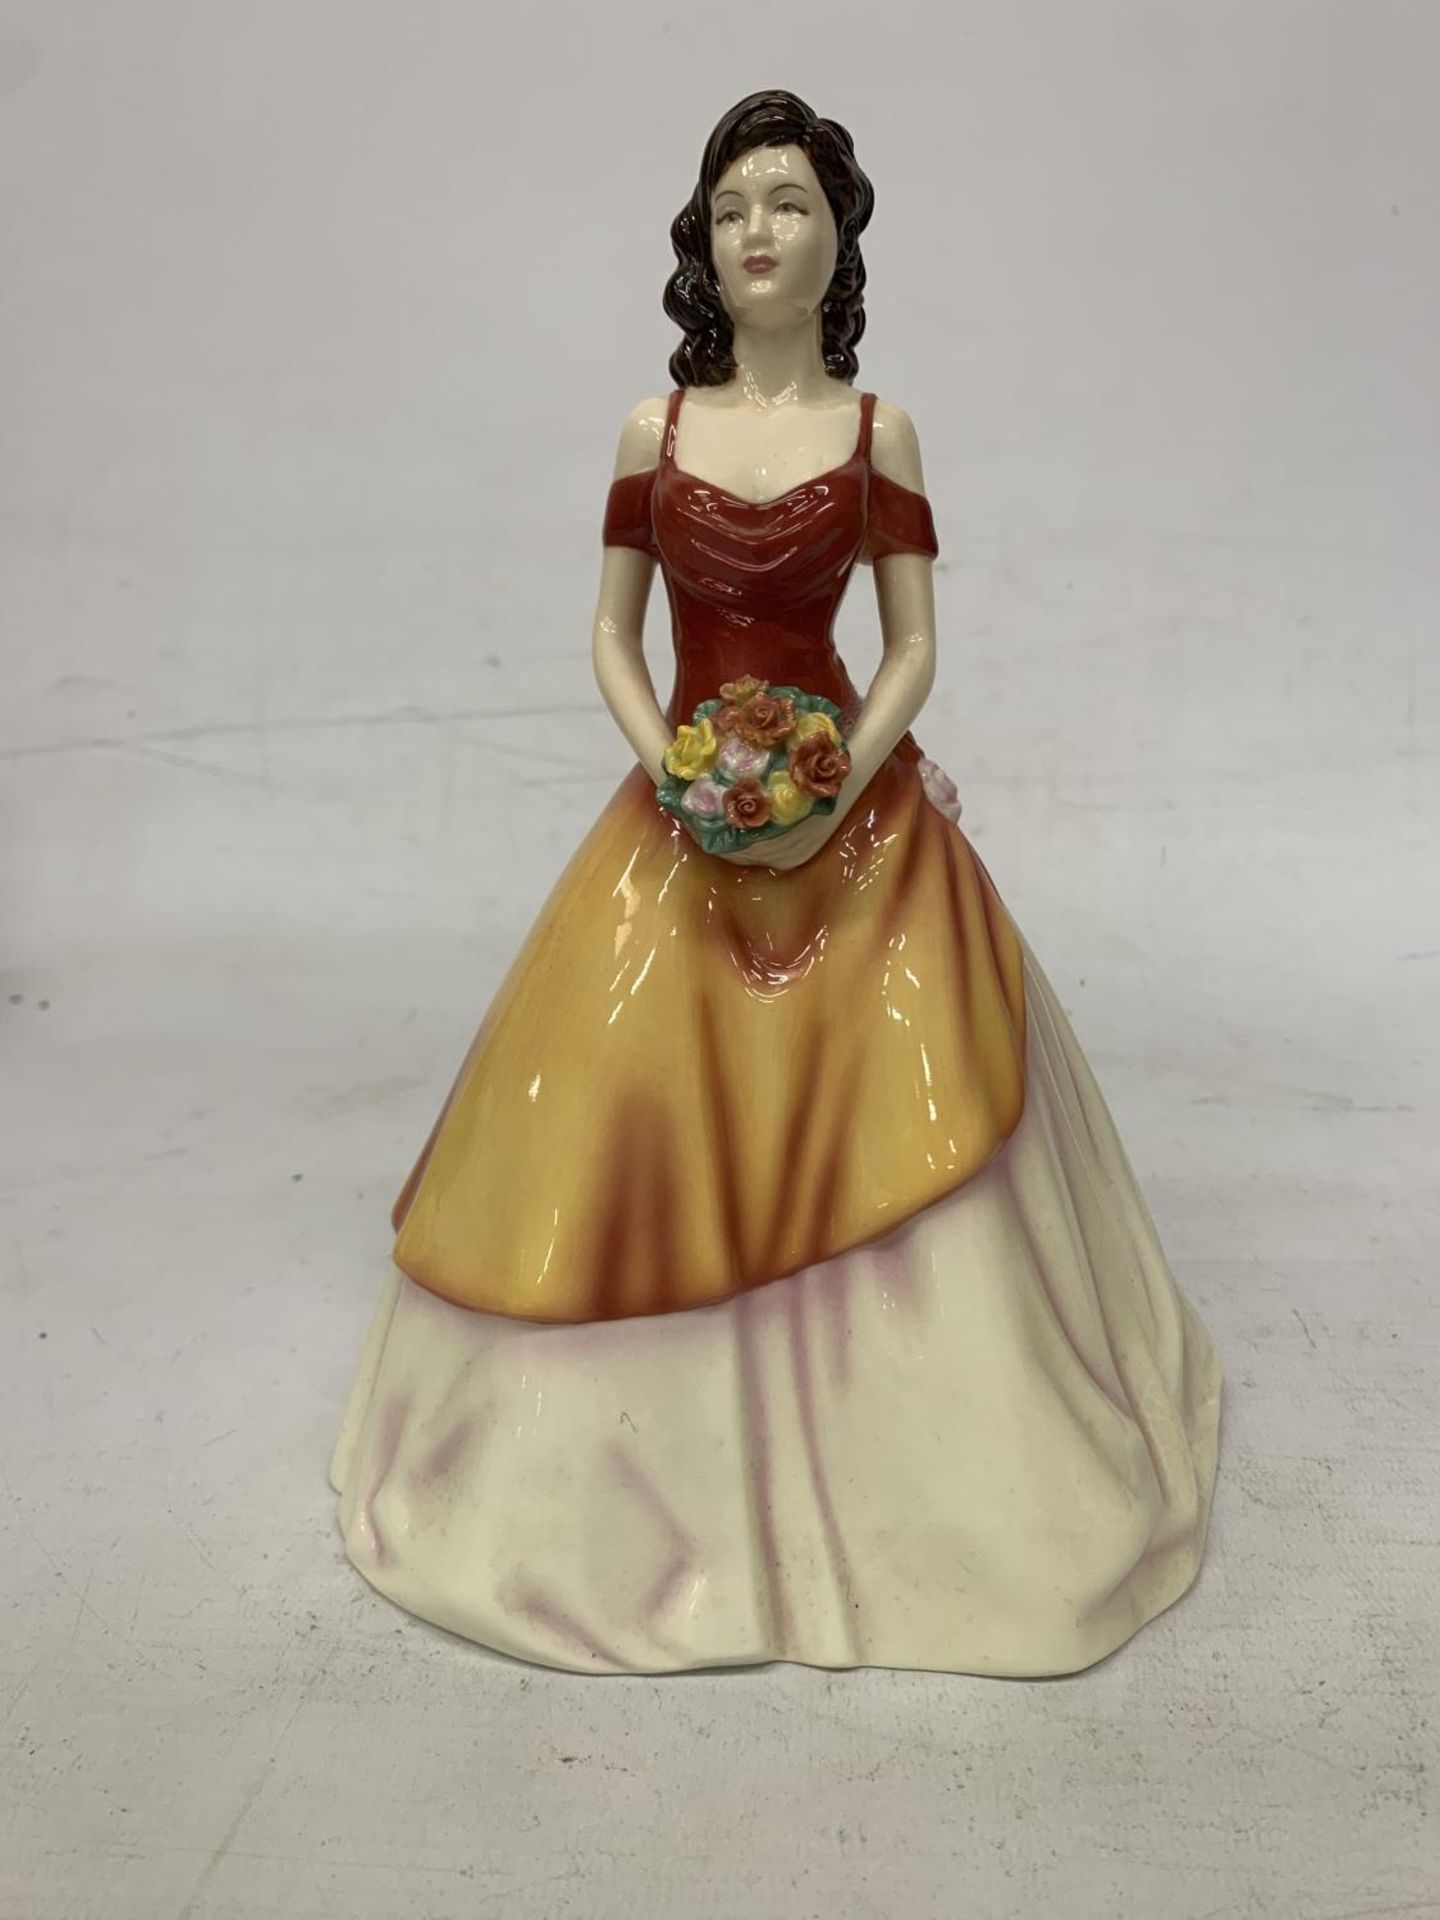 A BOXED ROYAL DOULTON FIGURE FROM THE PRETTY LADIES COLLECTION " LINDA"